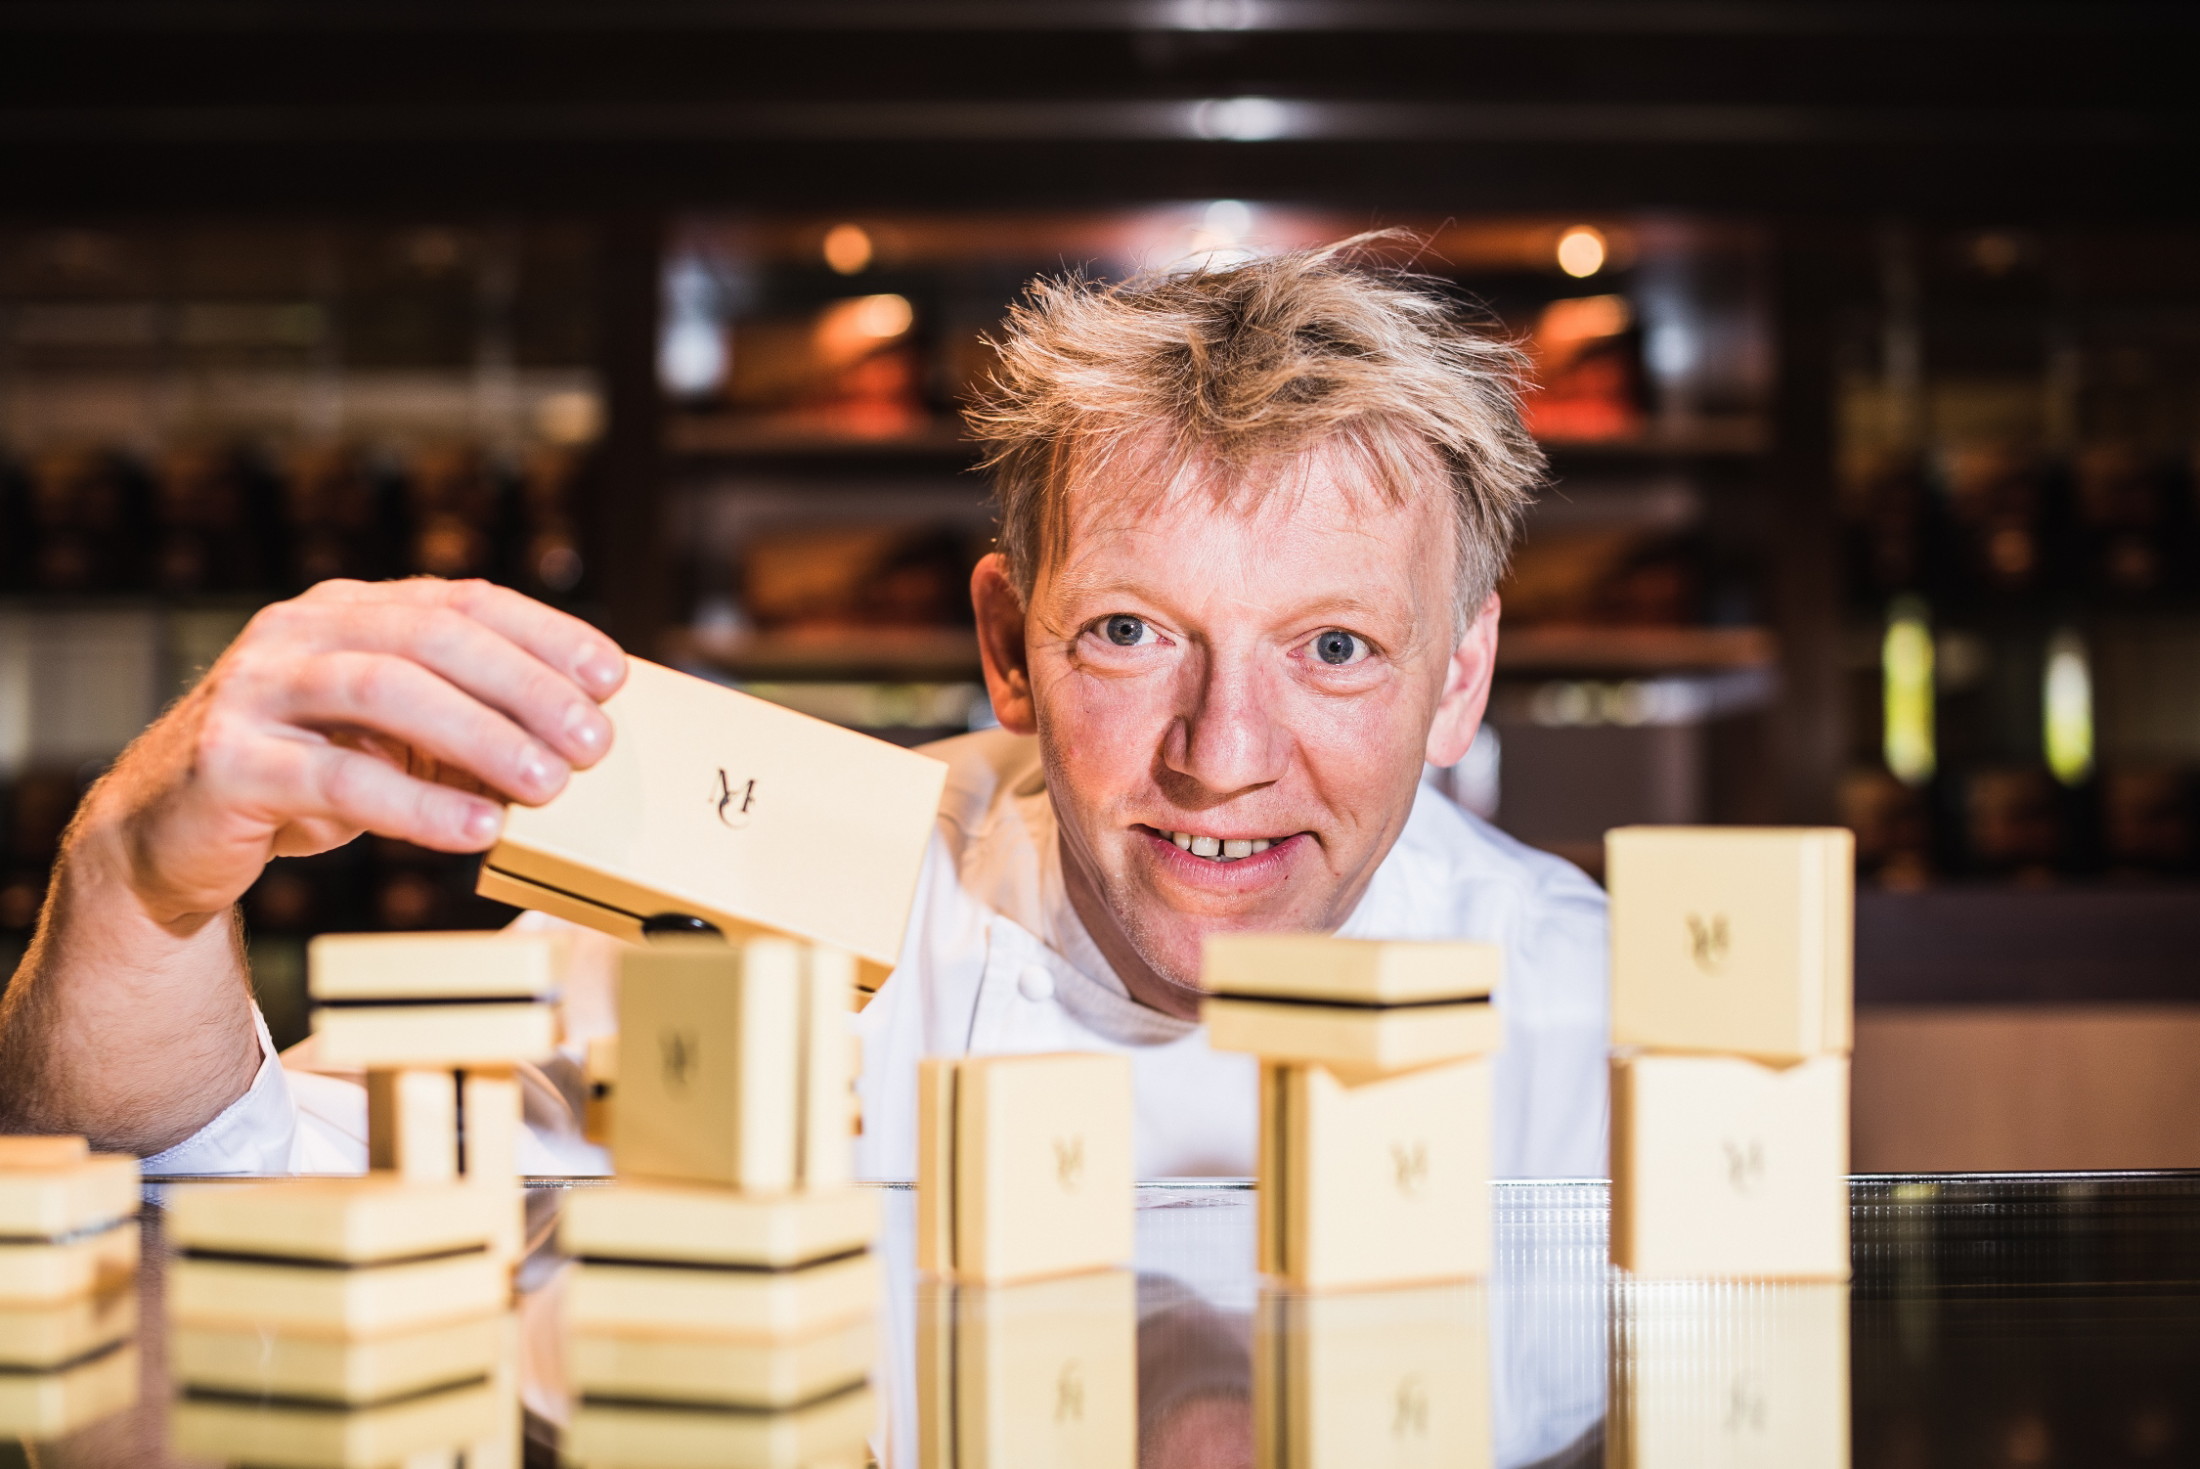 Master Chocolatier Gilles Marchal brings his indulgent creations to Hong Kong